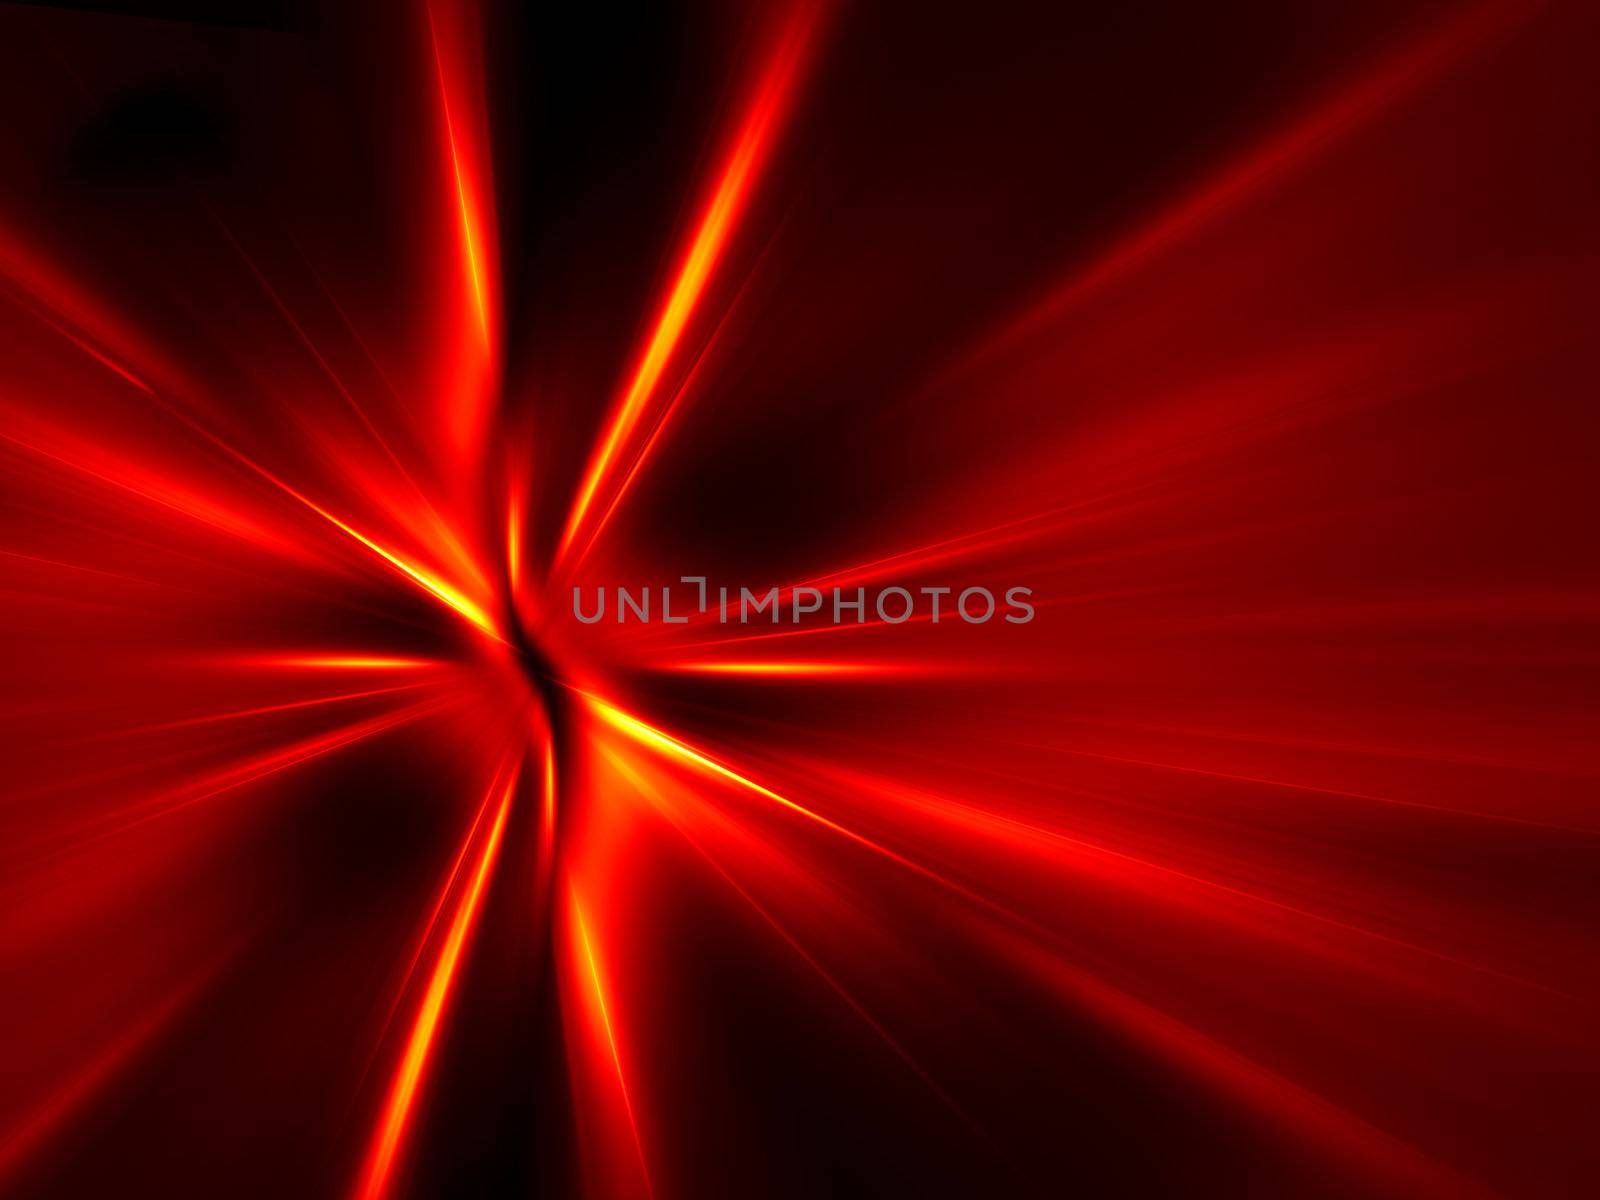 Red and yellow rays on black background. High resolution abstract image